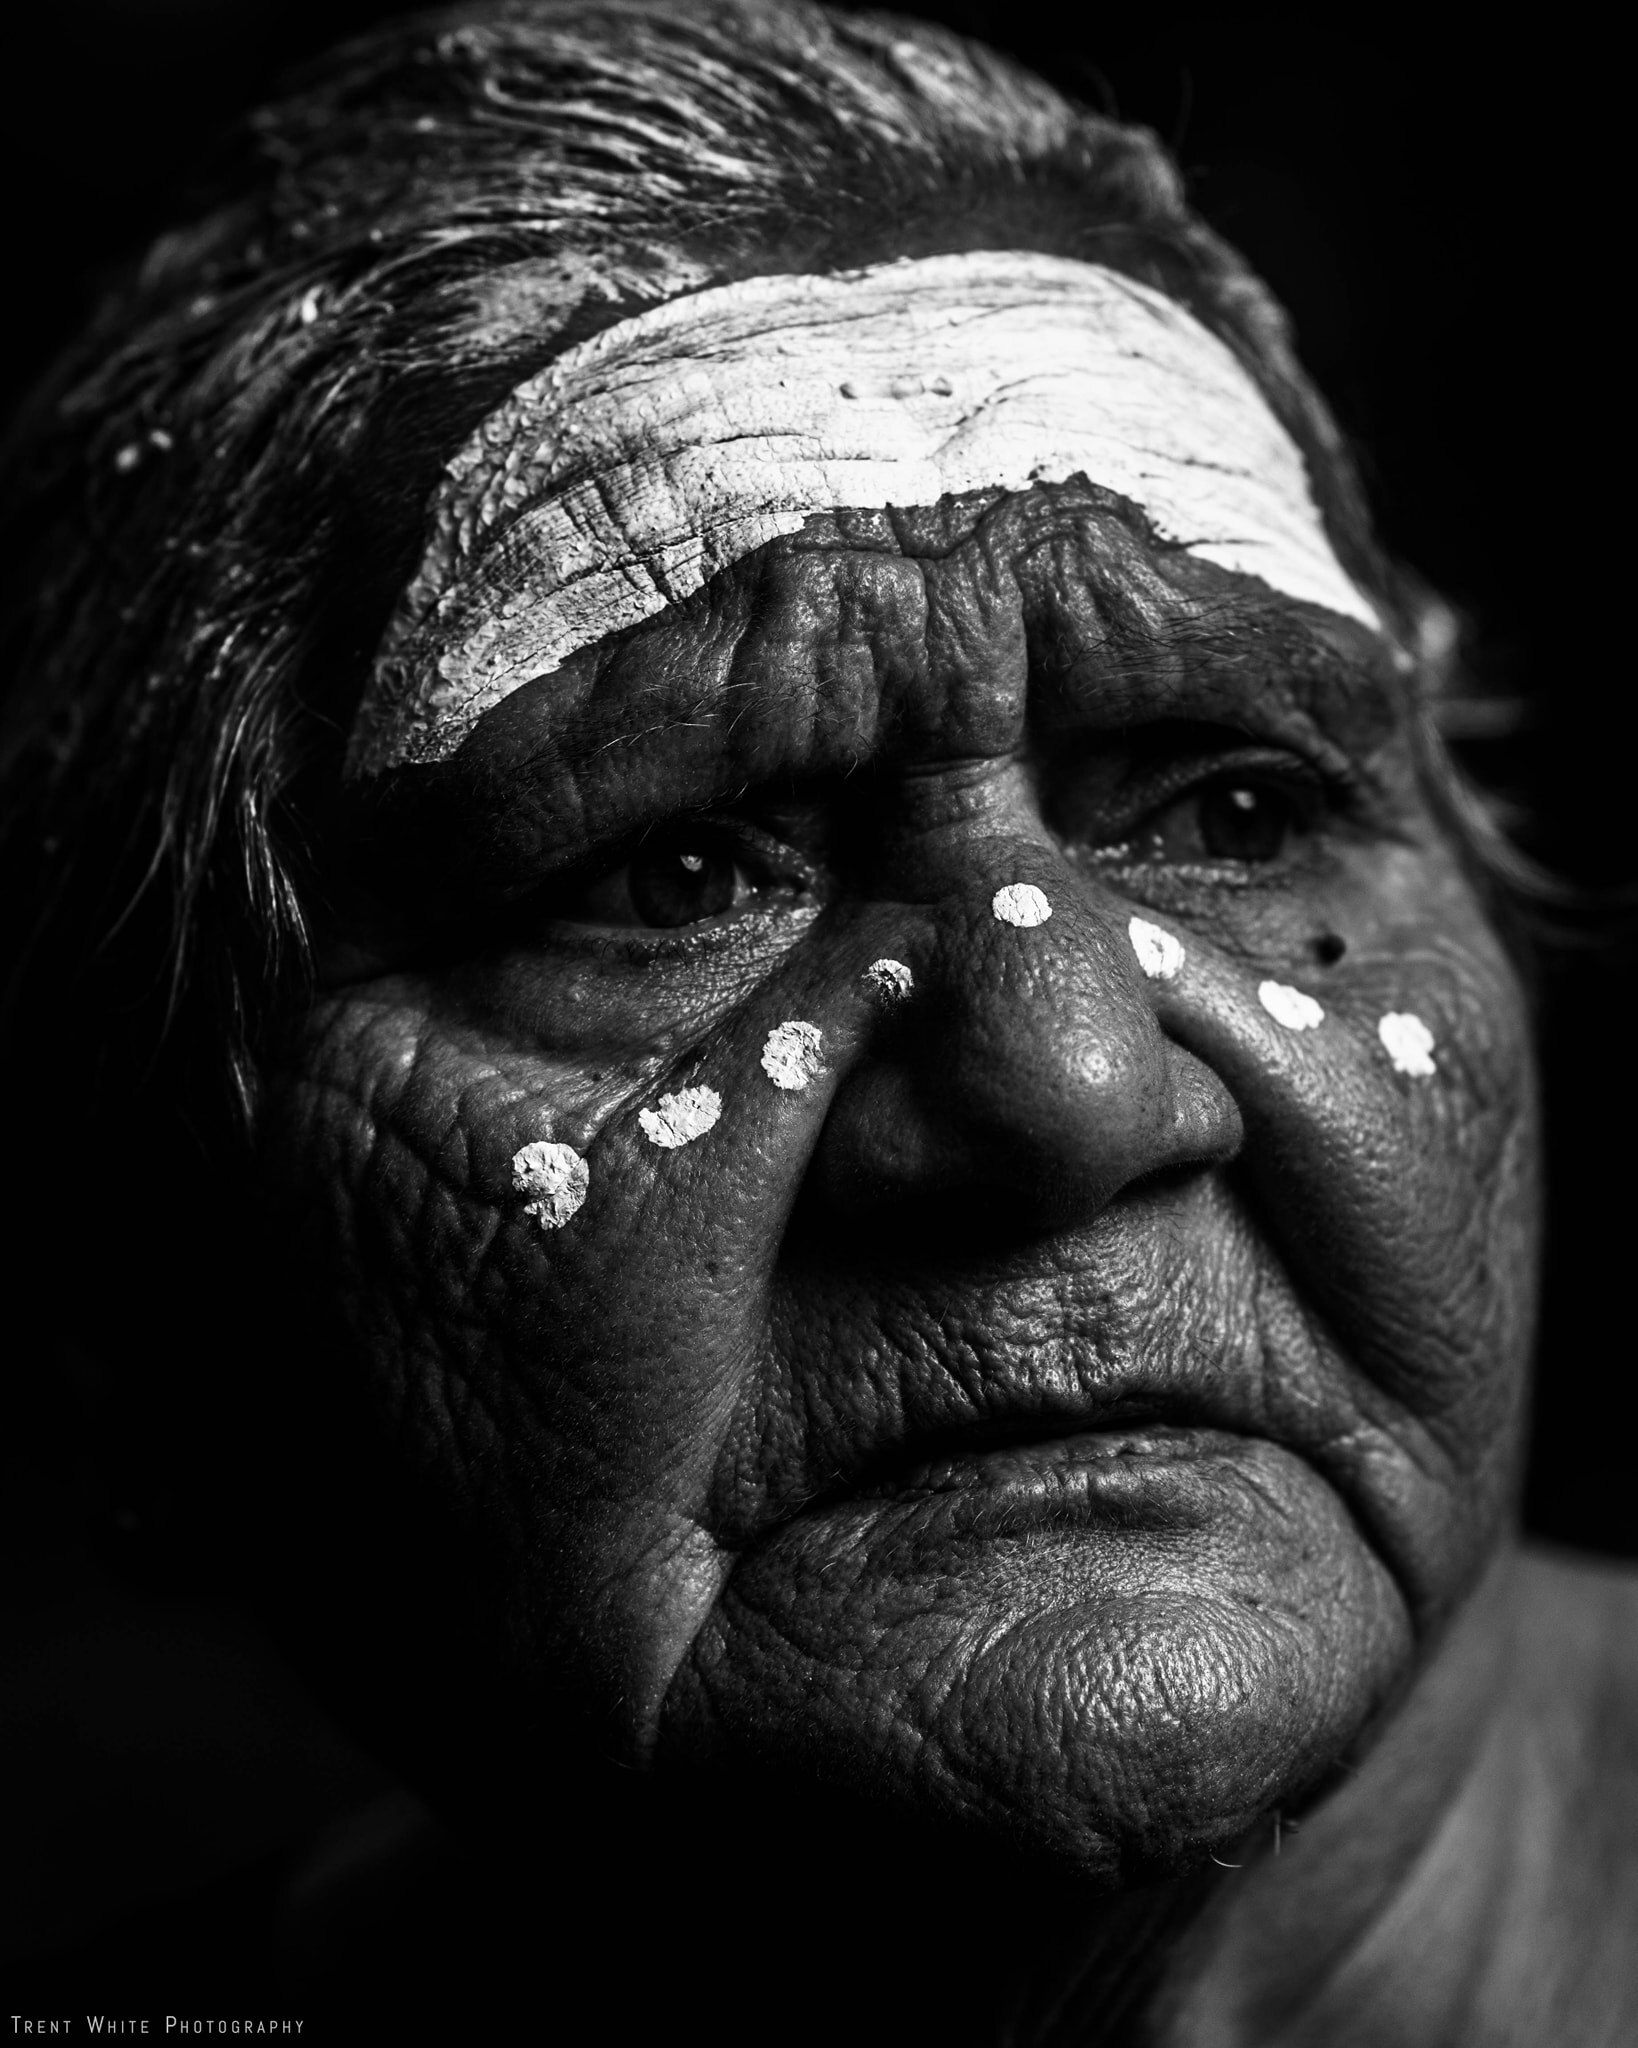 Aunty Venita Mann nee Fisher, close up, black and white, dots and lines painted on her face.